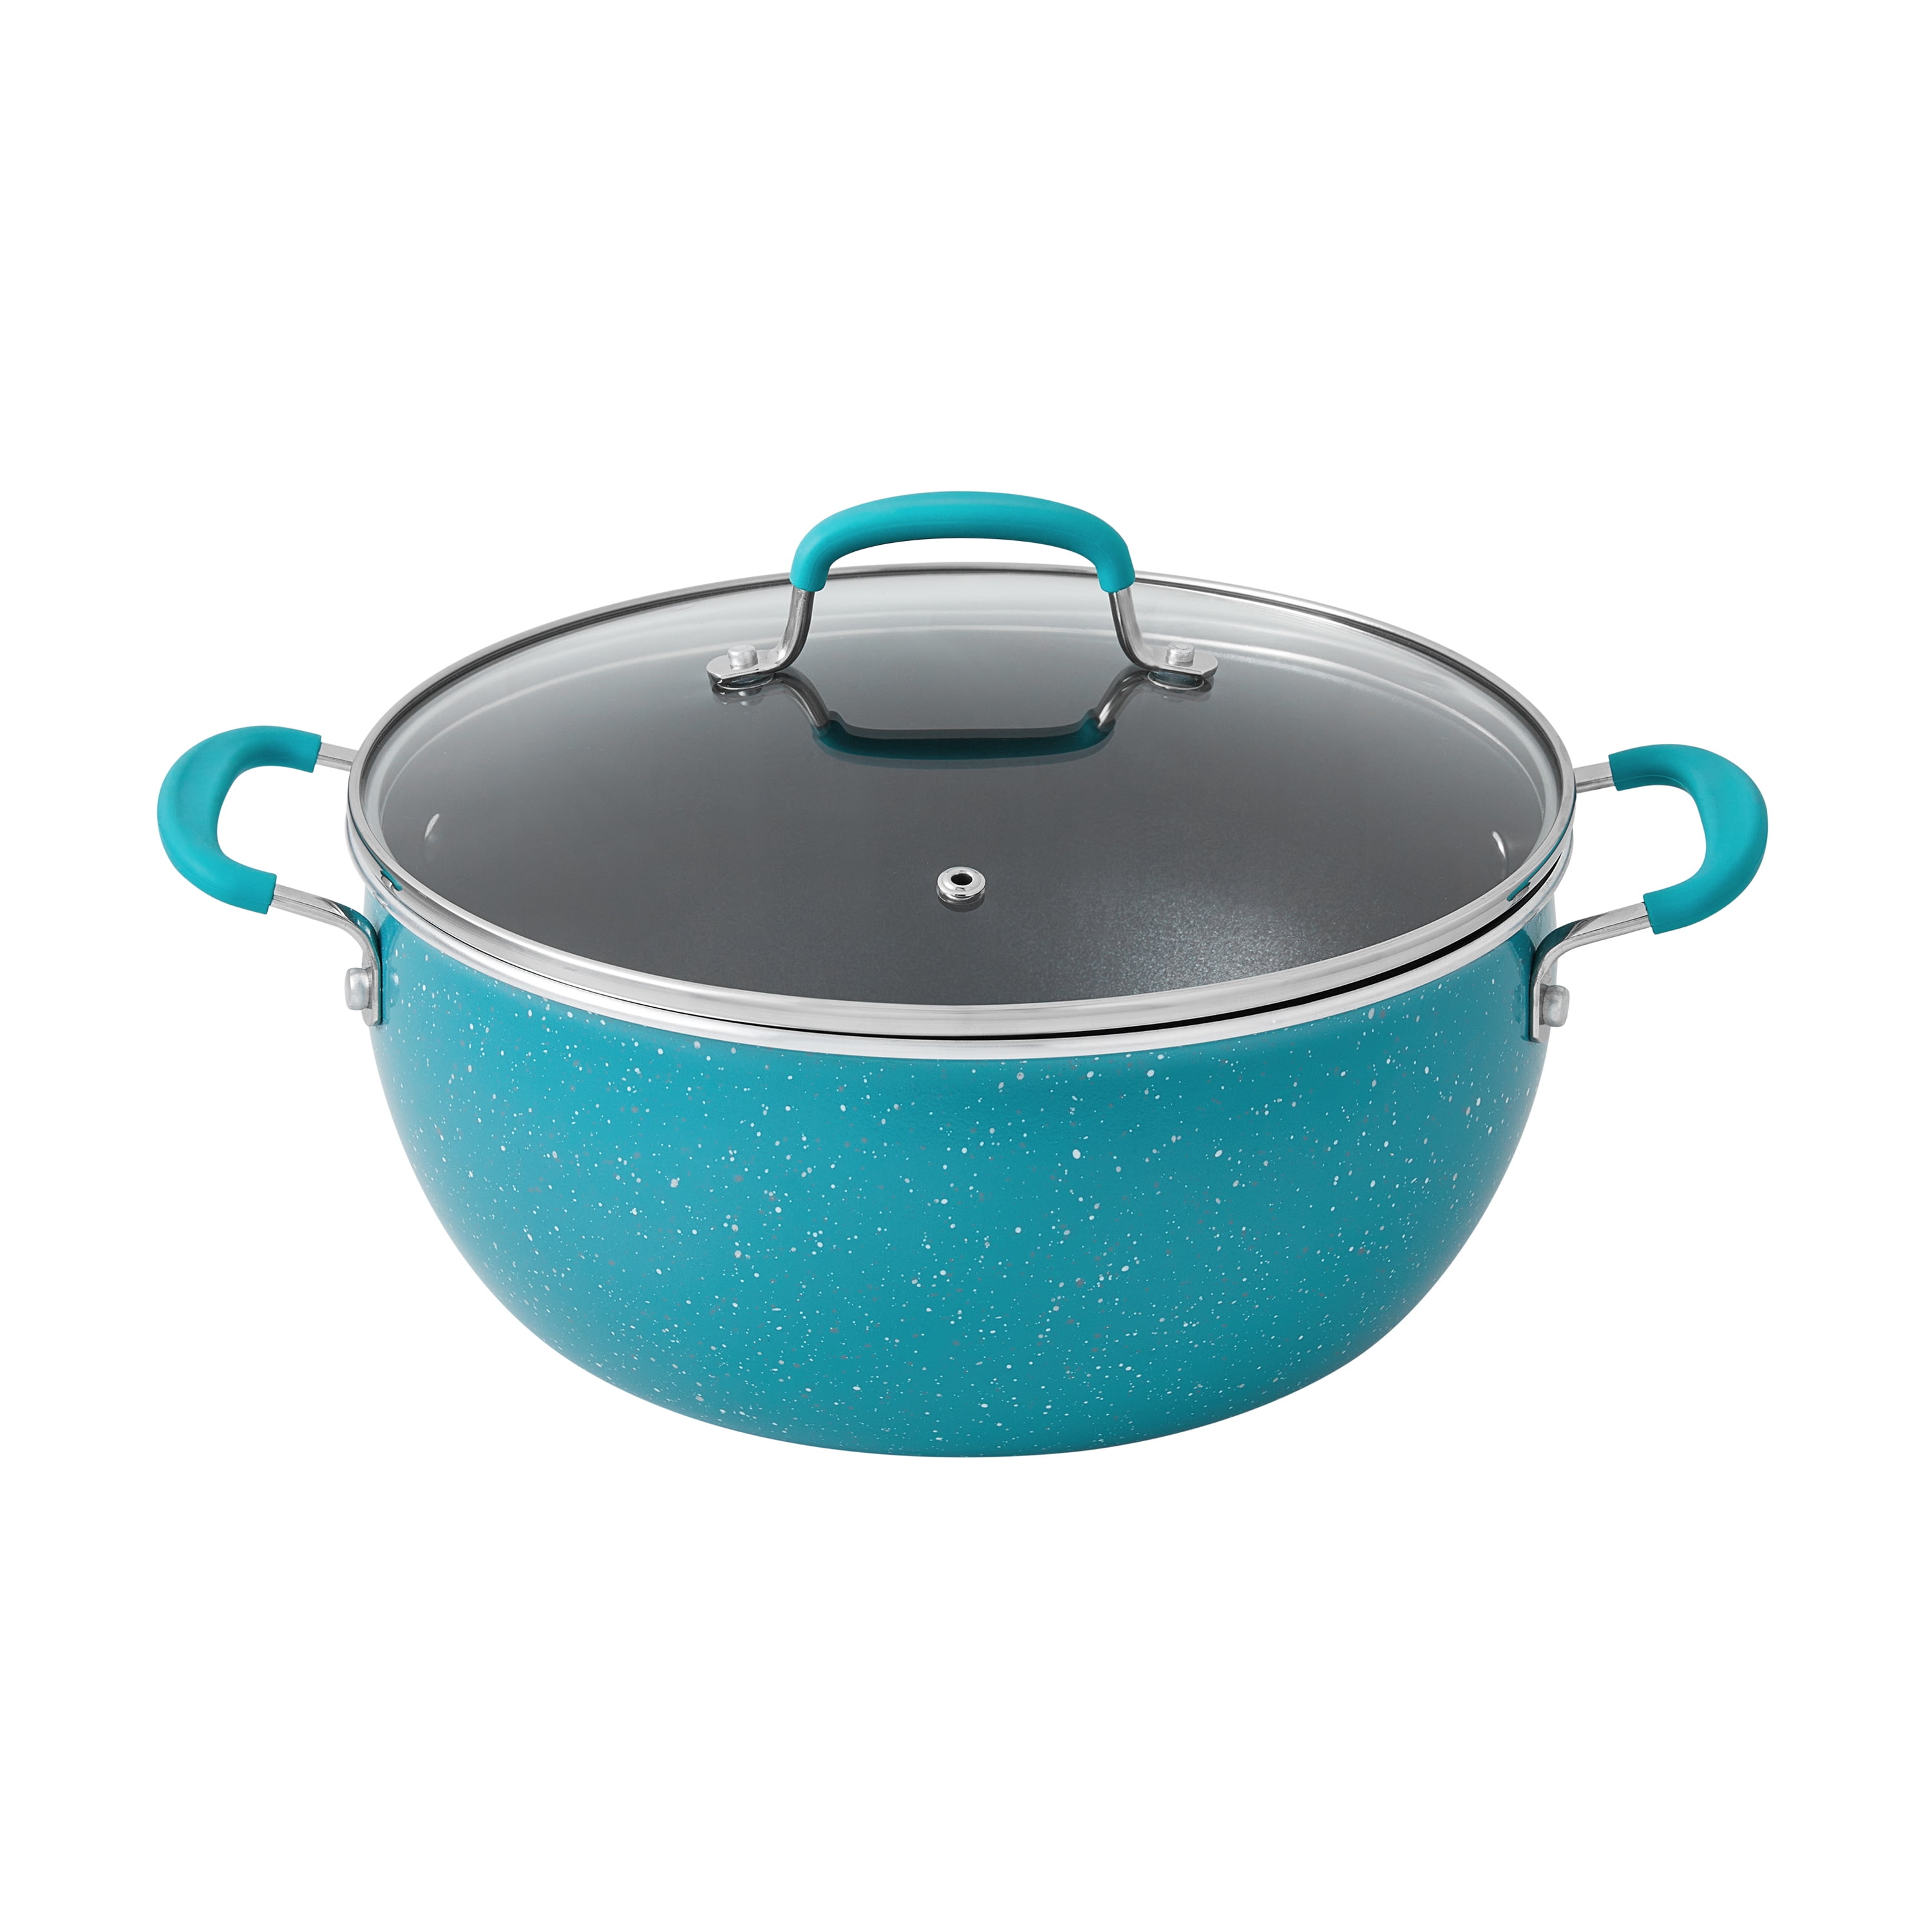 The Pioneer Woman Vintage Speckle Turquoise Cookware Set, 17 Piece